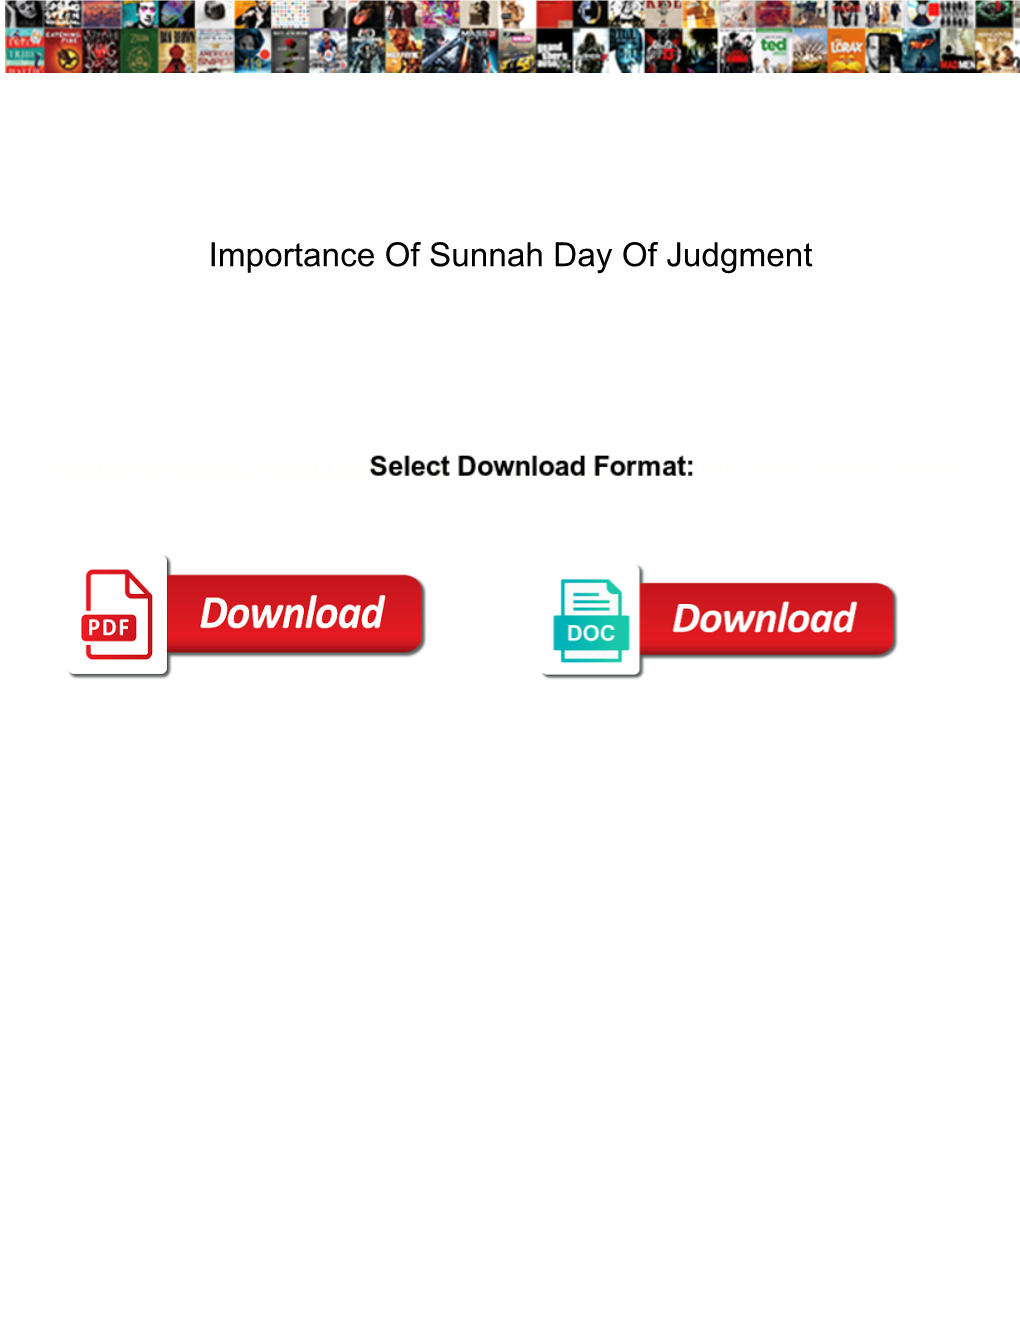 Importance of Sunnah Day of Judgment